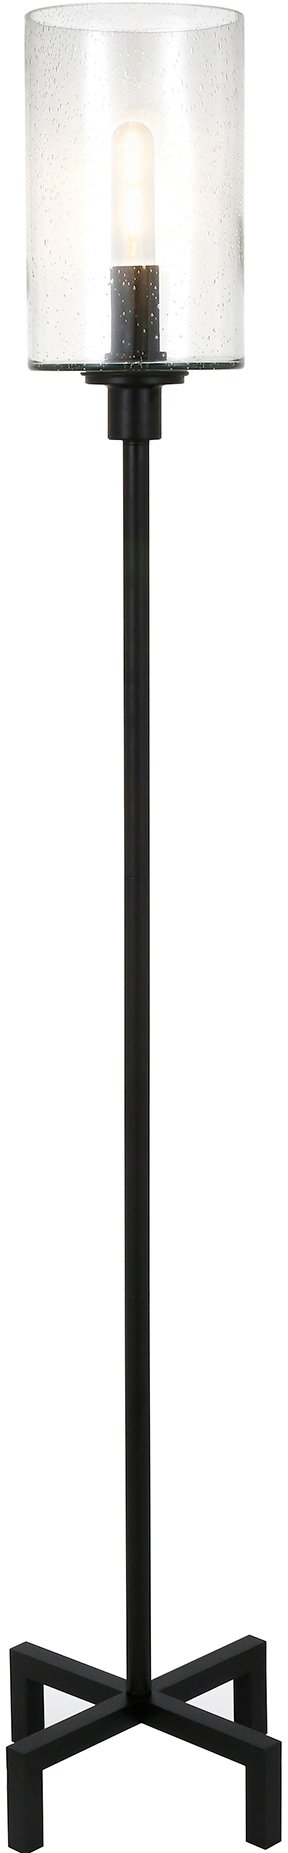 Panos Blackened Bronze Floor Lamp with Seeded Glass Shade | RC Willey